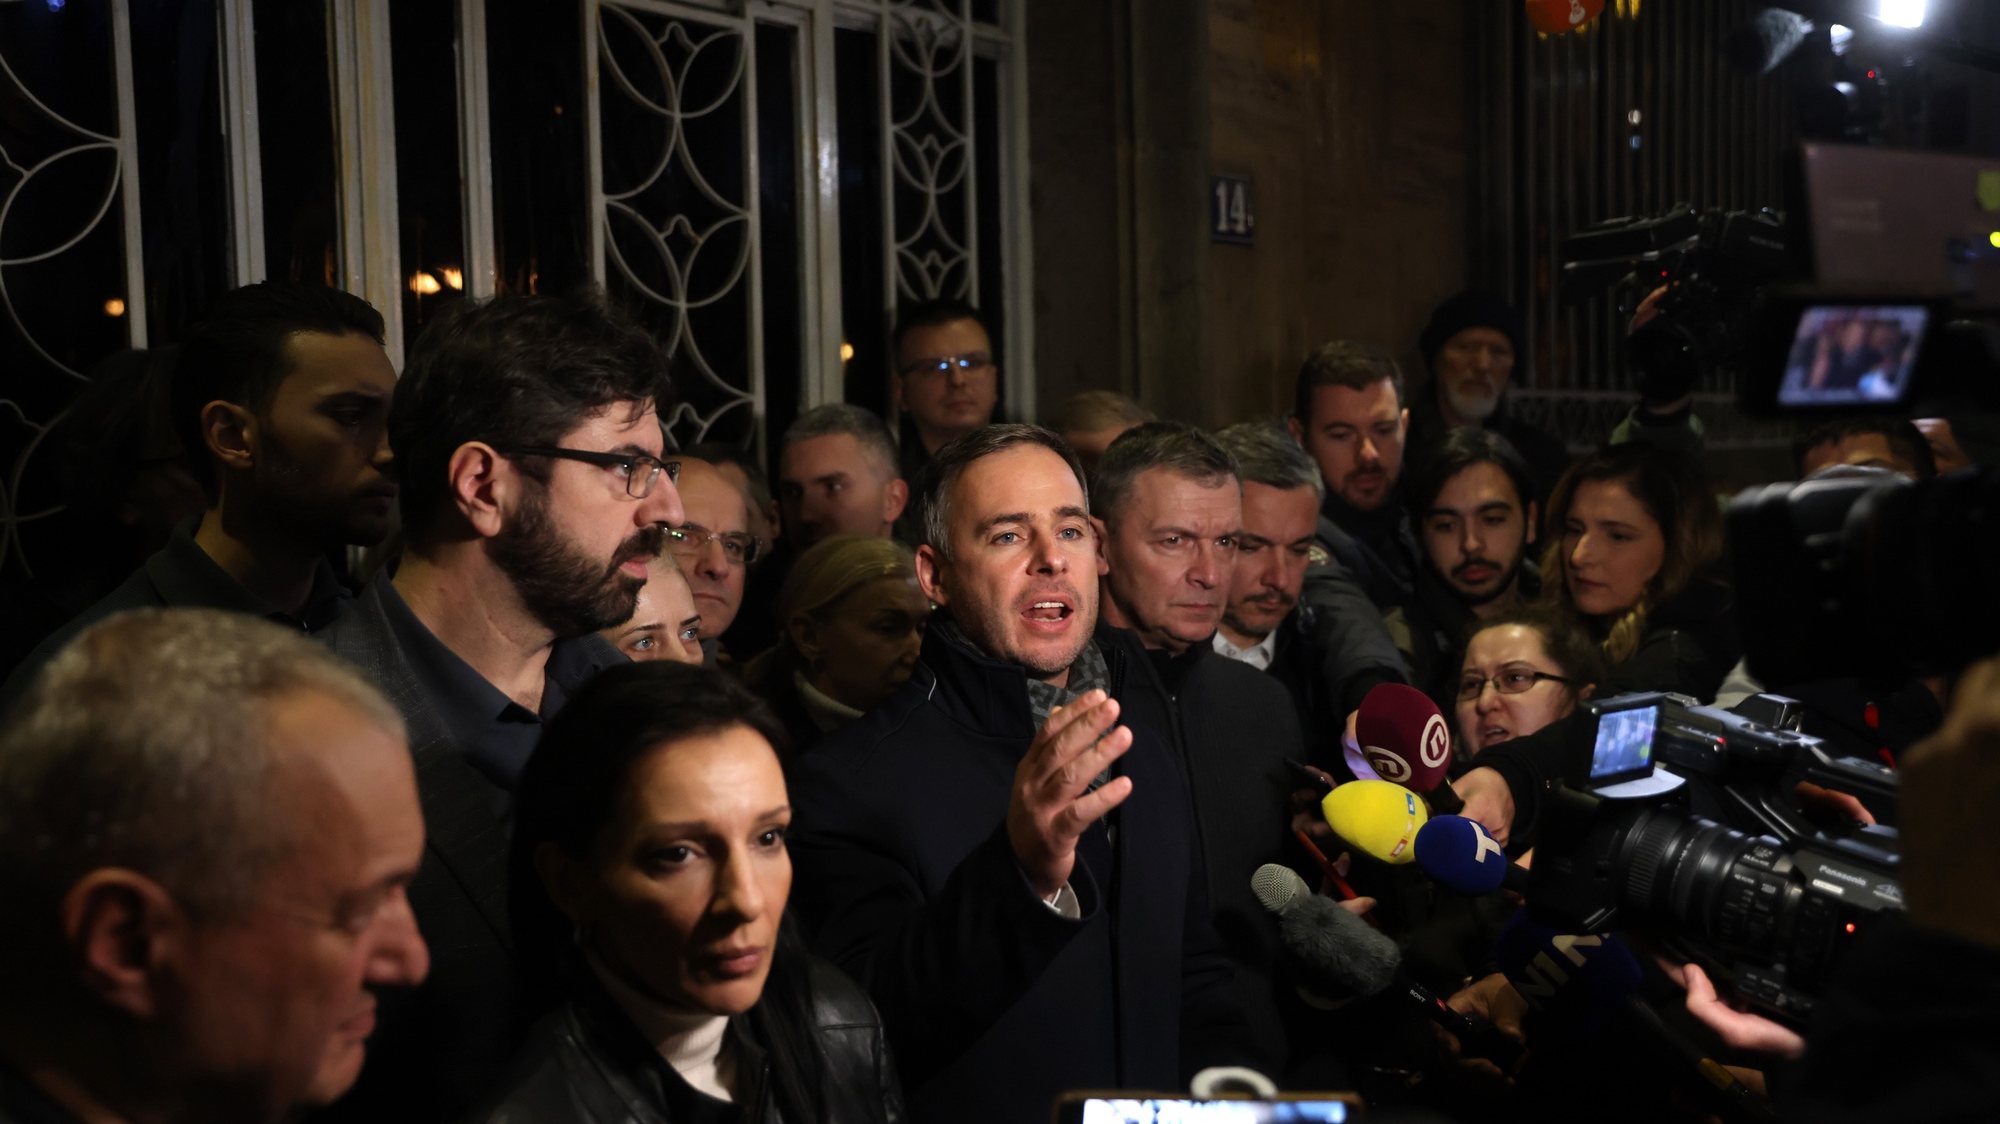 epa11036504 Serbian politician Miroslav Aleksic (C), flanked by other opposition leaders, speaks to members of the media in front of the Serbian Electoral Commission building in Belgrade, Serbia, 18 December 2023. Early official vote count after the Parliamentary and local elections confirmed that the Serbian Progressive Party (SNS) had won the election in Serbia and secured a majority in the Parliament, but tensions grew high after the opposition reported irregularities in the capital of Belgrade and called their supporters to protest at the electoral commission building.  EPA/ANDREJ CUKIC